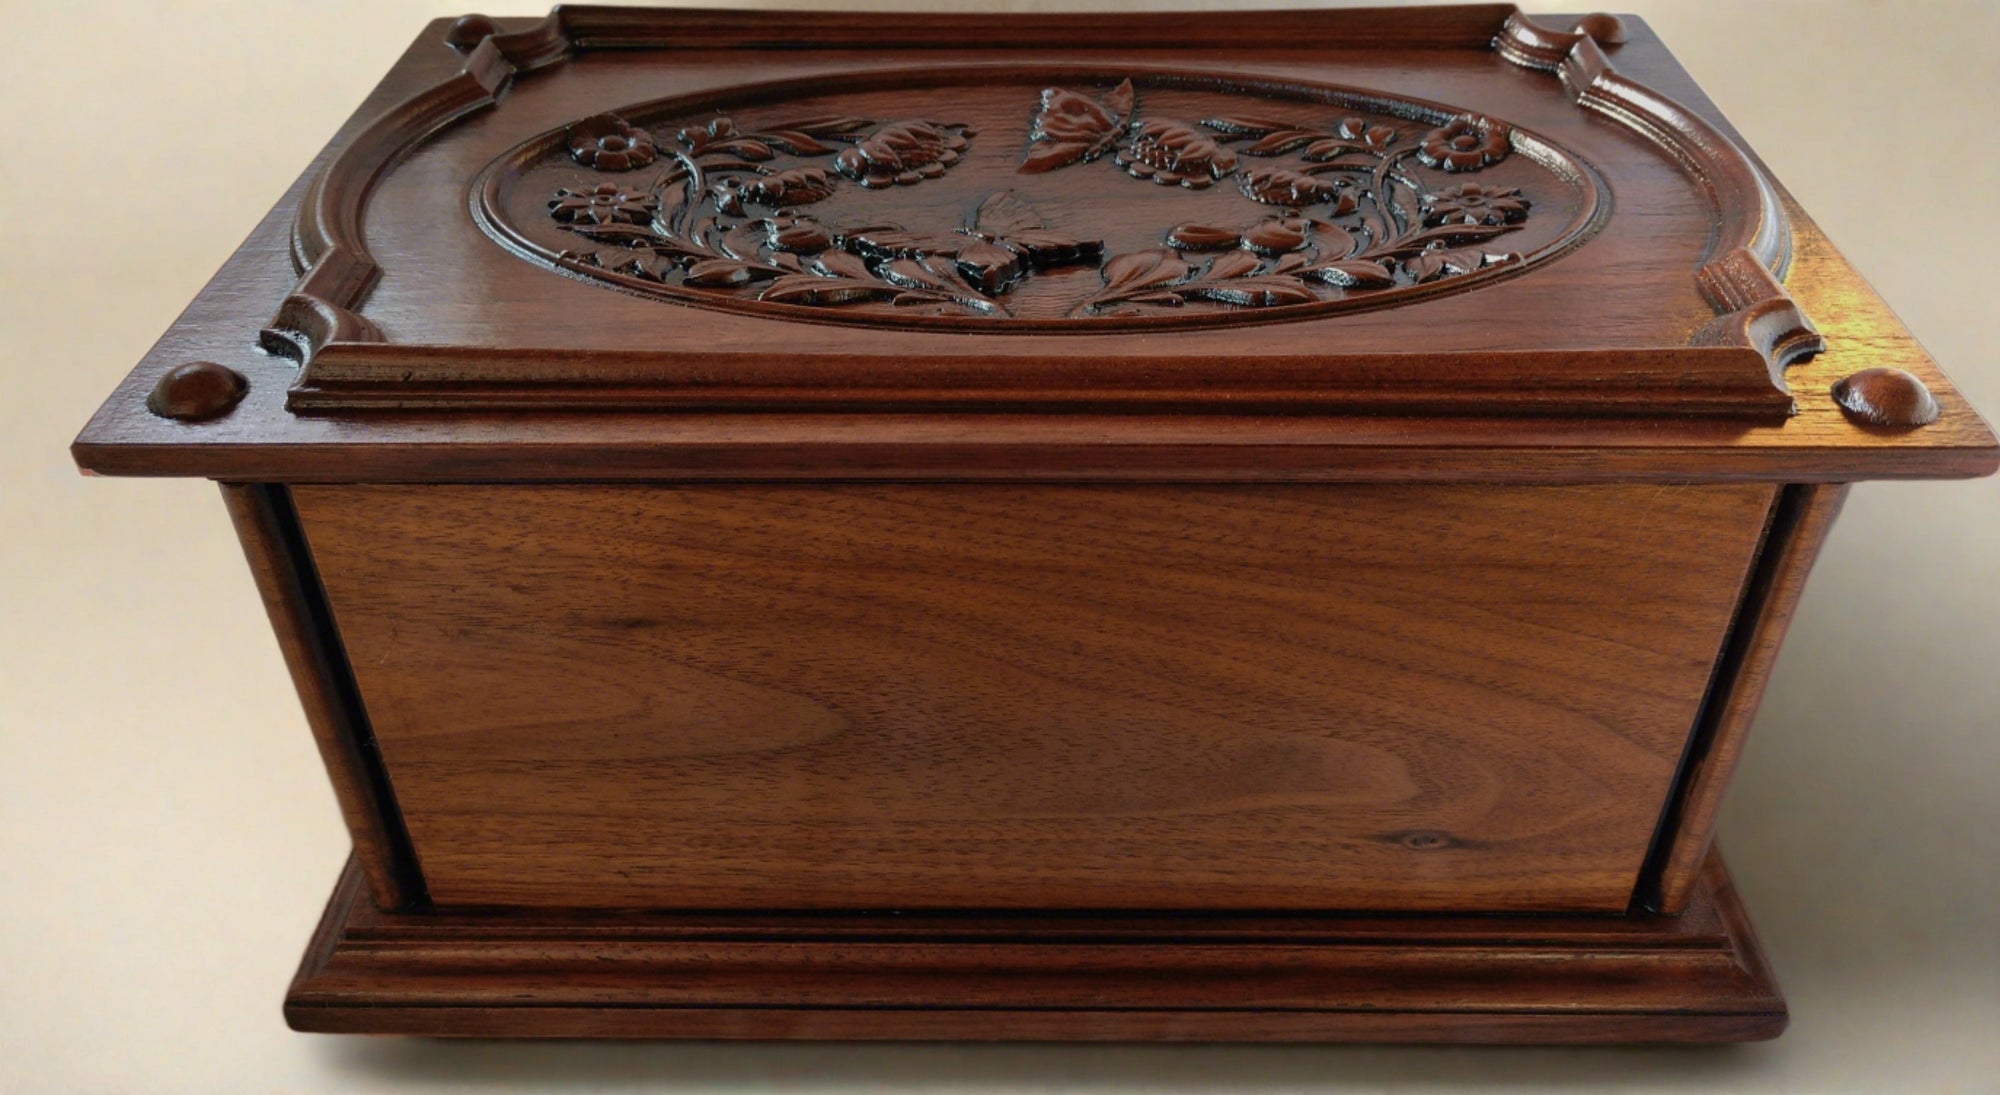 The top has carved images of butterflies and flowers surrounded by an ornate border • Beaded corners with molded edges Human ash urn for sale - elegant and dignified urn for storing cremated remains.